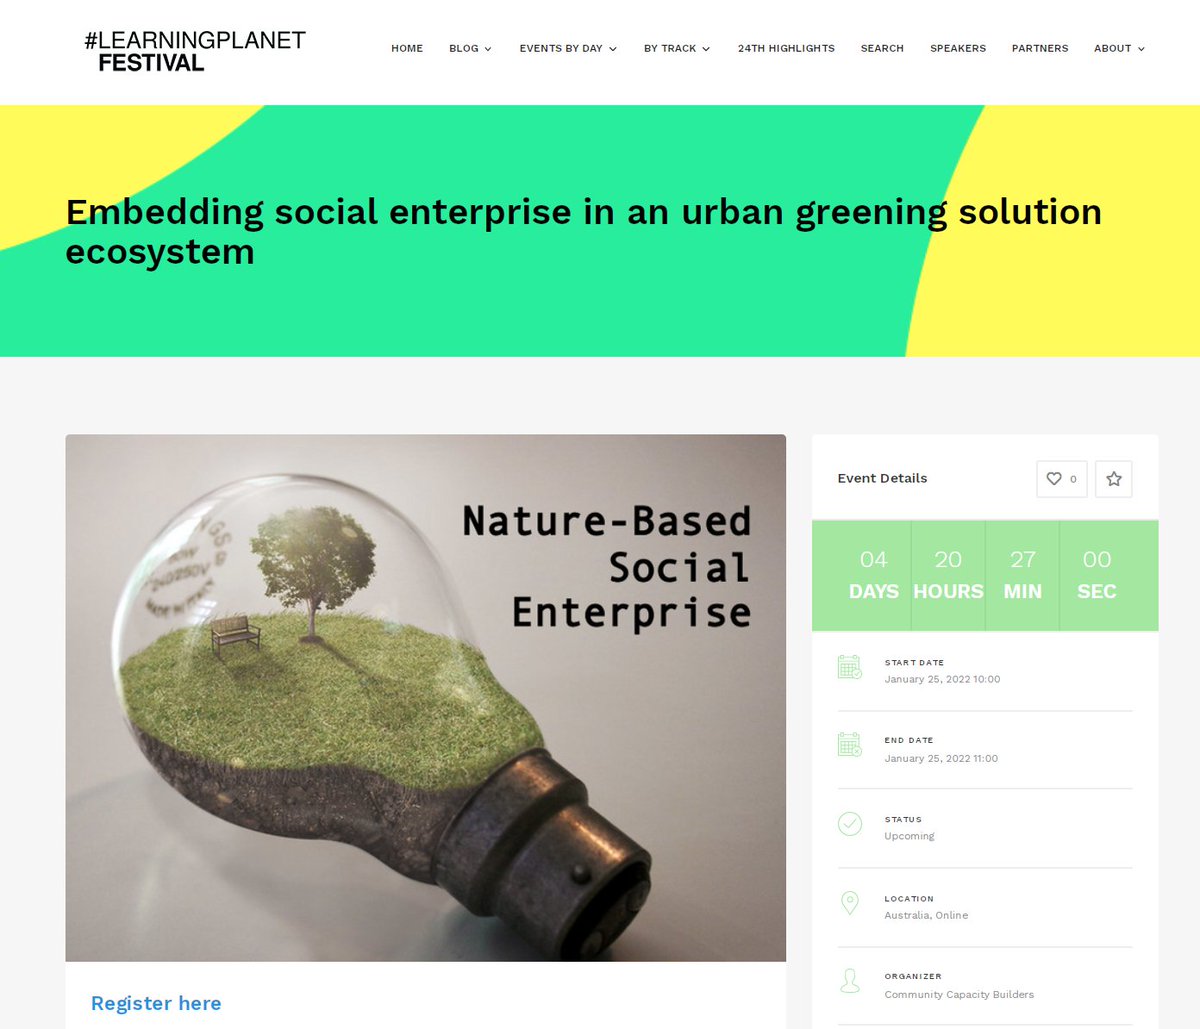 The @learningplanet_ Festival starts on Saturday!! During the Festival I'll be presenting a session on Nature-based Social Enterprise and the findings from the Greening Marion project. festival.learning-planet.org/event/embeddin…